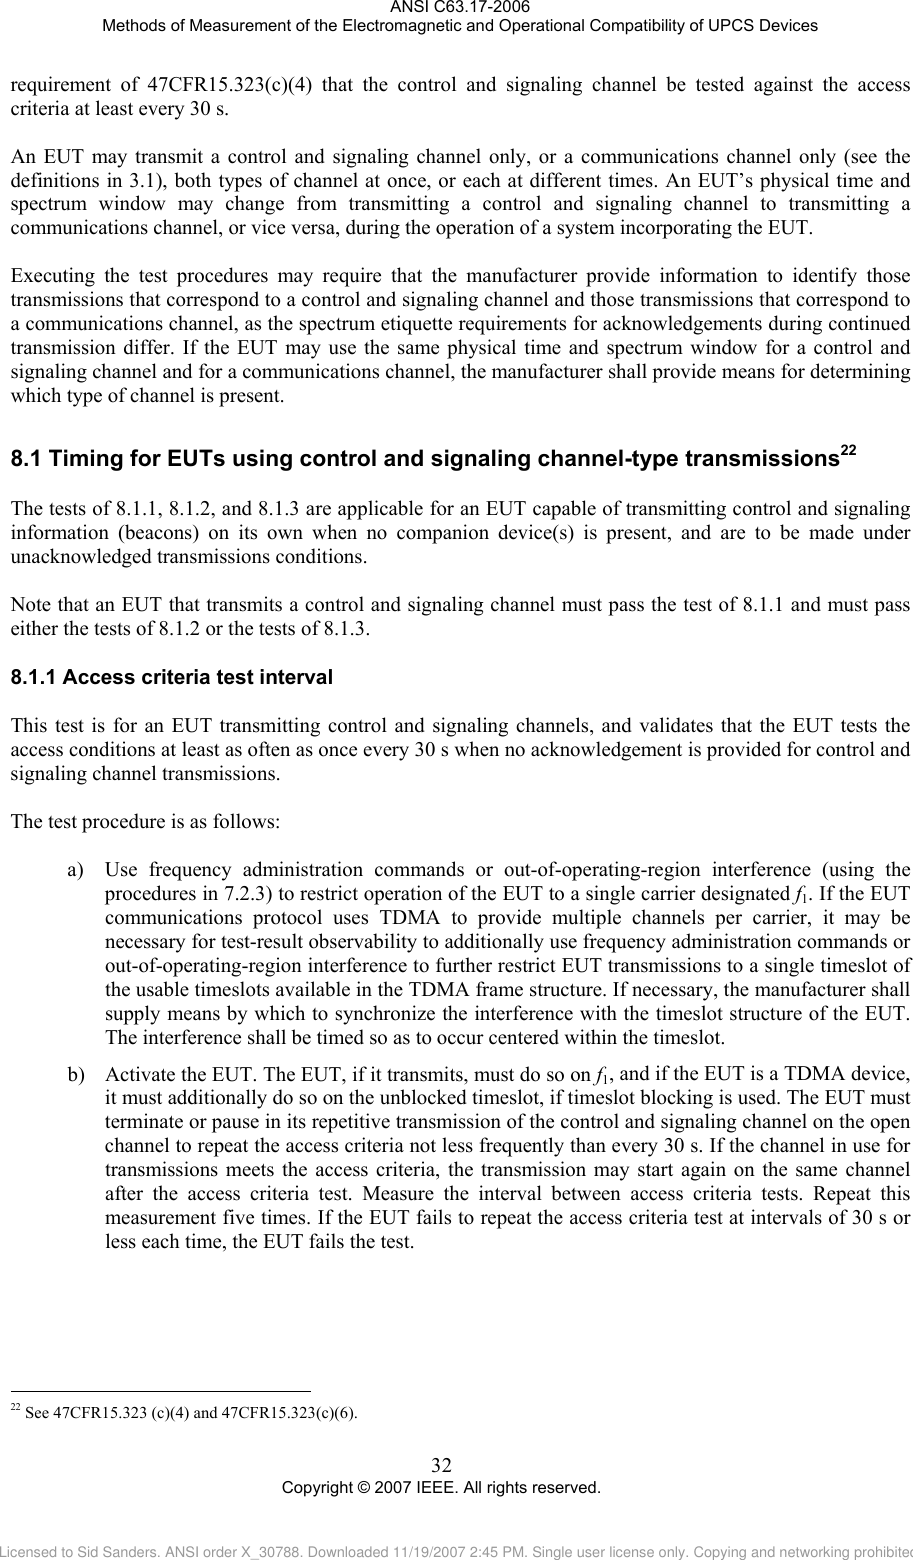 ANSI C63.17-2006 Methods of Measurement of the Electromagnetic and Operational Compatibility of UPCS Devices requirement of 47CFR15.323(c)(4) that the control and signaling channel be tested against the access criteria at least every 30 s.  An EUT may transmit a control and signaling channel only, or a communications channel only (see the definitions in 3.1), both types of channel at once, or each at different times. An EUT’s physical time and spectrum window may change from transmitting a control and signaling channel to transmitting a communications channel, or vice versa, during the operation of a system incorporating the EUT.   Executing the test procedures may require that the manufacturer provide information to identify those transmissions that correspond to a control and signaling channel and those transmissions that correspond to a communications channel, as the spectrum etiquette requirements for acknowledgements during continued transmission differ. If the EUT may use the same physical time and spectrum window for a control and signaling channel and for a communications channel, the manufacturer shall provide means for determining which type of channel is present.  8.18.1.1                                                 Timing for EUTs using control and signaling channel-type transmissions22  The tests of 8.1.1, 8.1.2, and 8.1.3 are applicable for an EUT capable of transmitting control and signaling information (beacons) on its own when no companion device(s) is present, and are to be made under unacknowledged transmissions conditions.   Note that an EUT that transmits a control and signaling channel must pass the test of 8.1.1 and must pass either the tests of 8.1.2 or the tests of 8.1.3.   Access criteria test interval This test is for an EUT transmitting control and signaling channels, and validates that the EUT tests the access conditions at least as often as once every 30 s when no acknowledgement is provided for control and signaling channel transmissions.  The test procedure is as follows:  a) Use frequency administration commands or out-of-operating-region interference (using the procedures in 7.2.3) to restrict operation of the EUT to a single carrier designated f1. If the EUT communications protocol uses TDMA to provide multiple channels per carrier, it may be necessary for test-result observability to additionally use frequency administration commands or out-of-operating-region interference to further restrict EUT transmissions to a single timeslot of the usable timeslots available in the TDMA frame structure. If necessary, the manufacturer shall supply means by which to synchronize the interference with the timeslot structure of the EUT. The interference shall be timed so as to occur centered within the timeslot.  b) Activate the EUT. The EUT, if it transmits, must do so on f1, and if the EUT is a TDMA device, it must additionally do so on the unblocked timeslot, if timeslot blocking is used. The EUT must terminate or pause in its repetitive transmission of the control and signaling channel on the open channel to repeat the access criteria not less frequently than every 30 s. If the channel in use for transmissions meets the access criteria, the transmission may start again on the same channel after the access criteria test. Measure the interval between access criteria tests. Repeat this measurement five times. If the EUT fails to repeat the access criteria test at intervals of 30 s or less each time, the EUT fails the test.  22 See 47CFR15.323 (c)(4) and 47CFR15.323(c)(6). 32 Copyright © 2007 IEEE. All rights reserved. Licensed to Sid Sanders. ANSI order X_30788. Downloaded 11/19/2007 2:45 PM. Single user license only. Copying and networking prohibited.